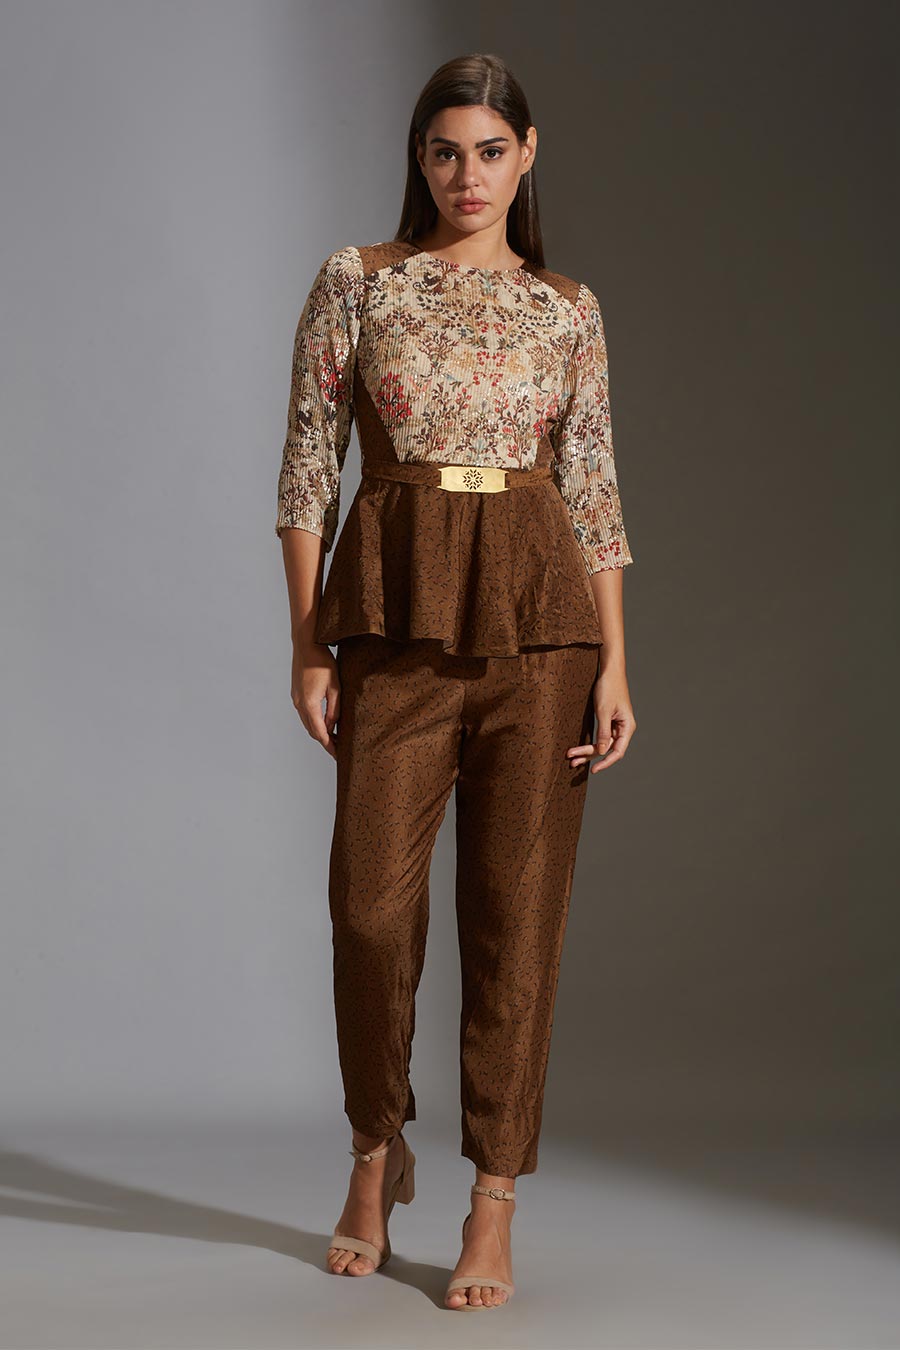 Sequined Peplum Top and Pant Co-Ord Set